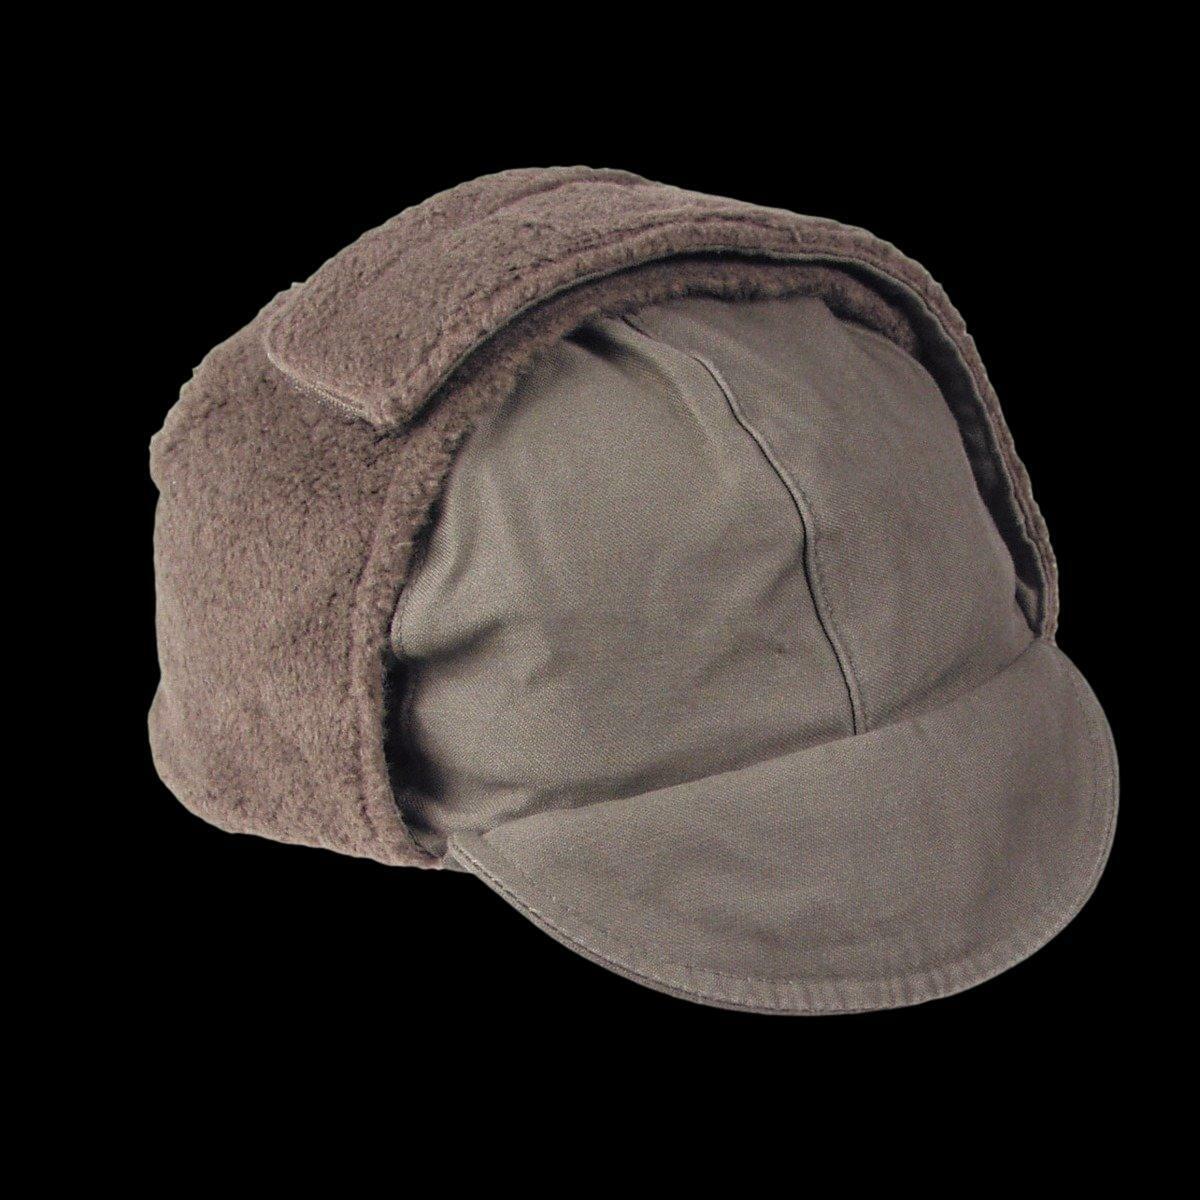 GERMAN MILITARY ARMY OD GREEN COLD WEATHER WINTER CAP/HAT EAR FLAPS 59 / 7 3/8 